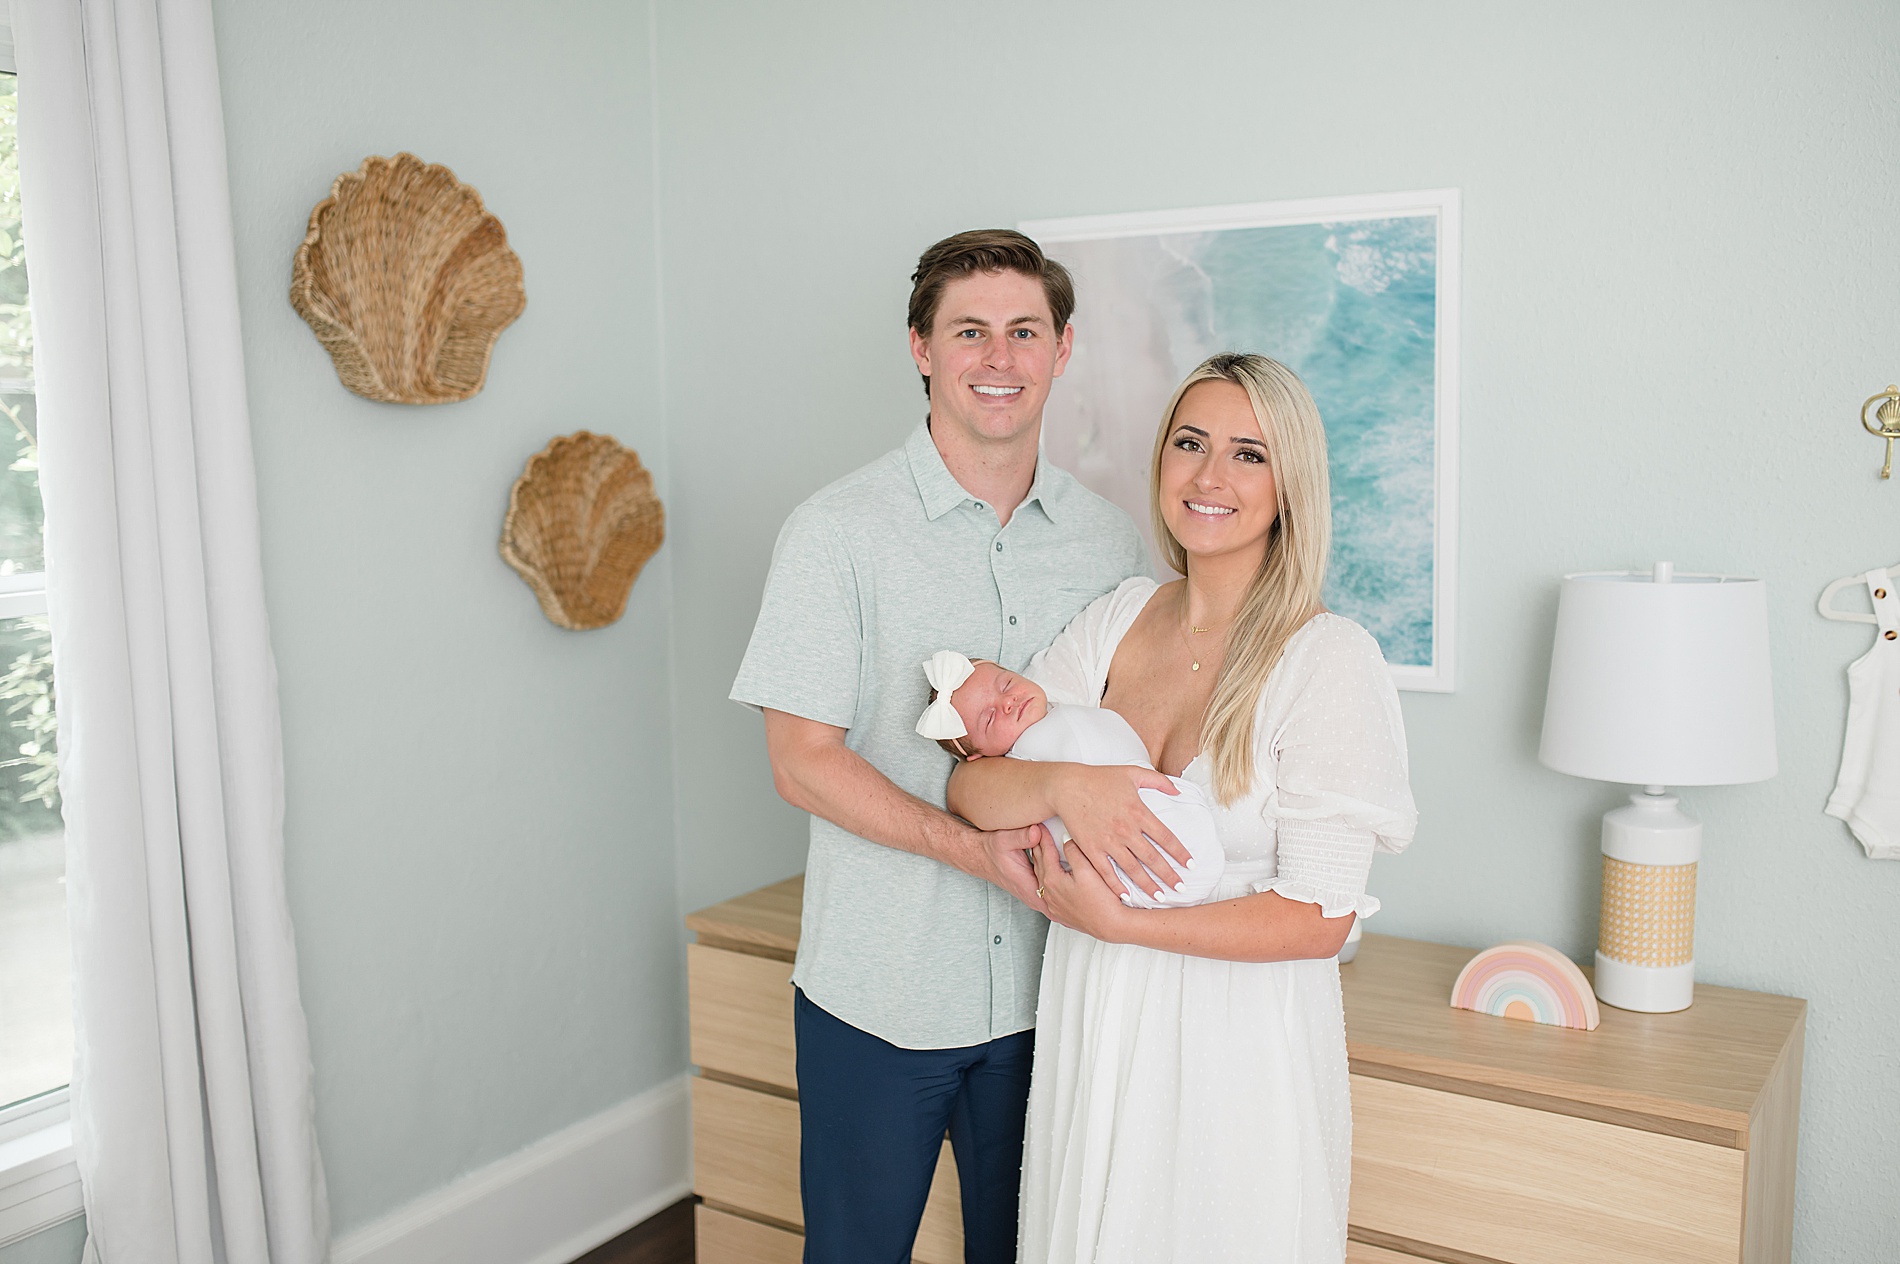 parents hold baby girl in nursery during in-home newborn session photographed by Dallas Newborn Photographer, Lindsey Dutton Photography